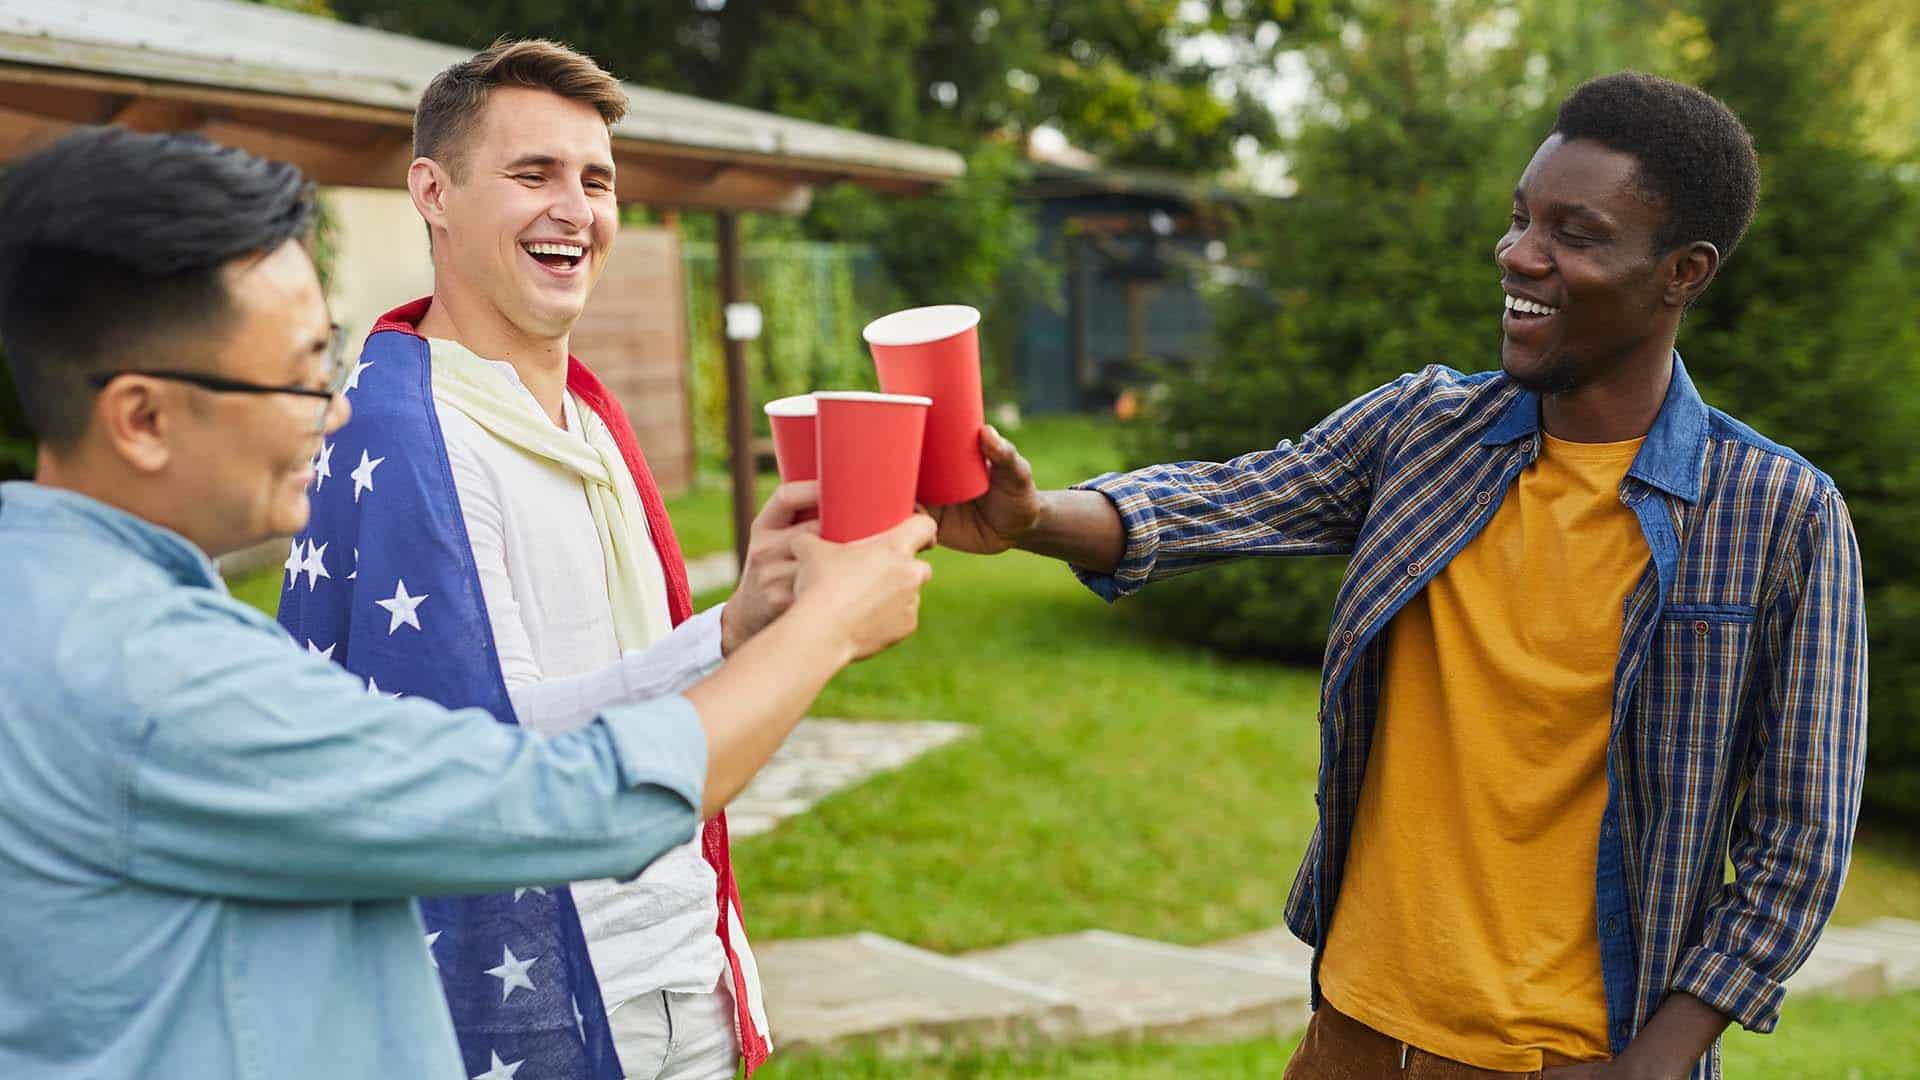 Waist up portrait of multi-ethnic group of men drinking beer while enjoying outdoor party in Summer for Independence day